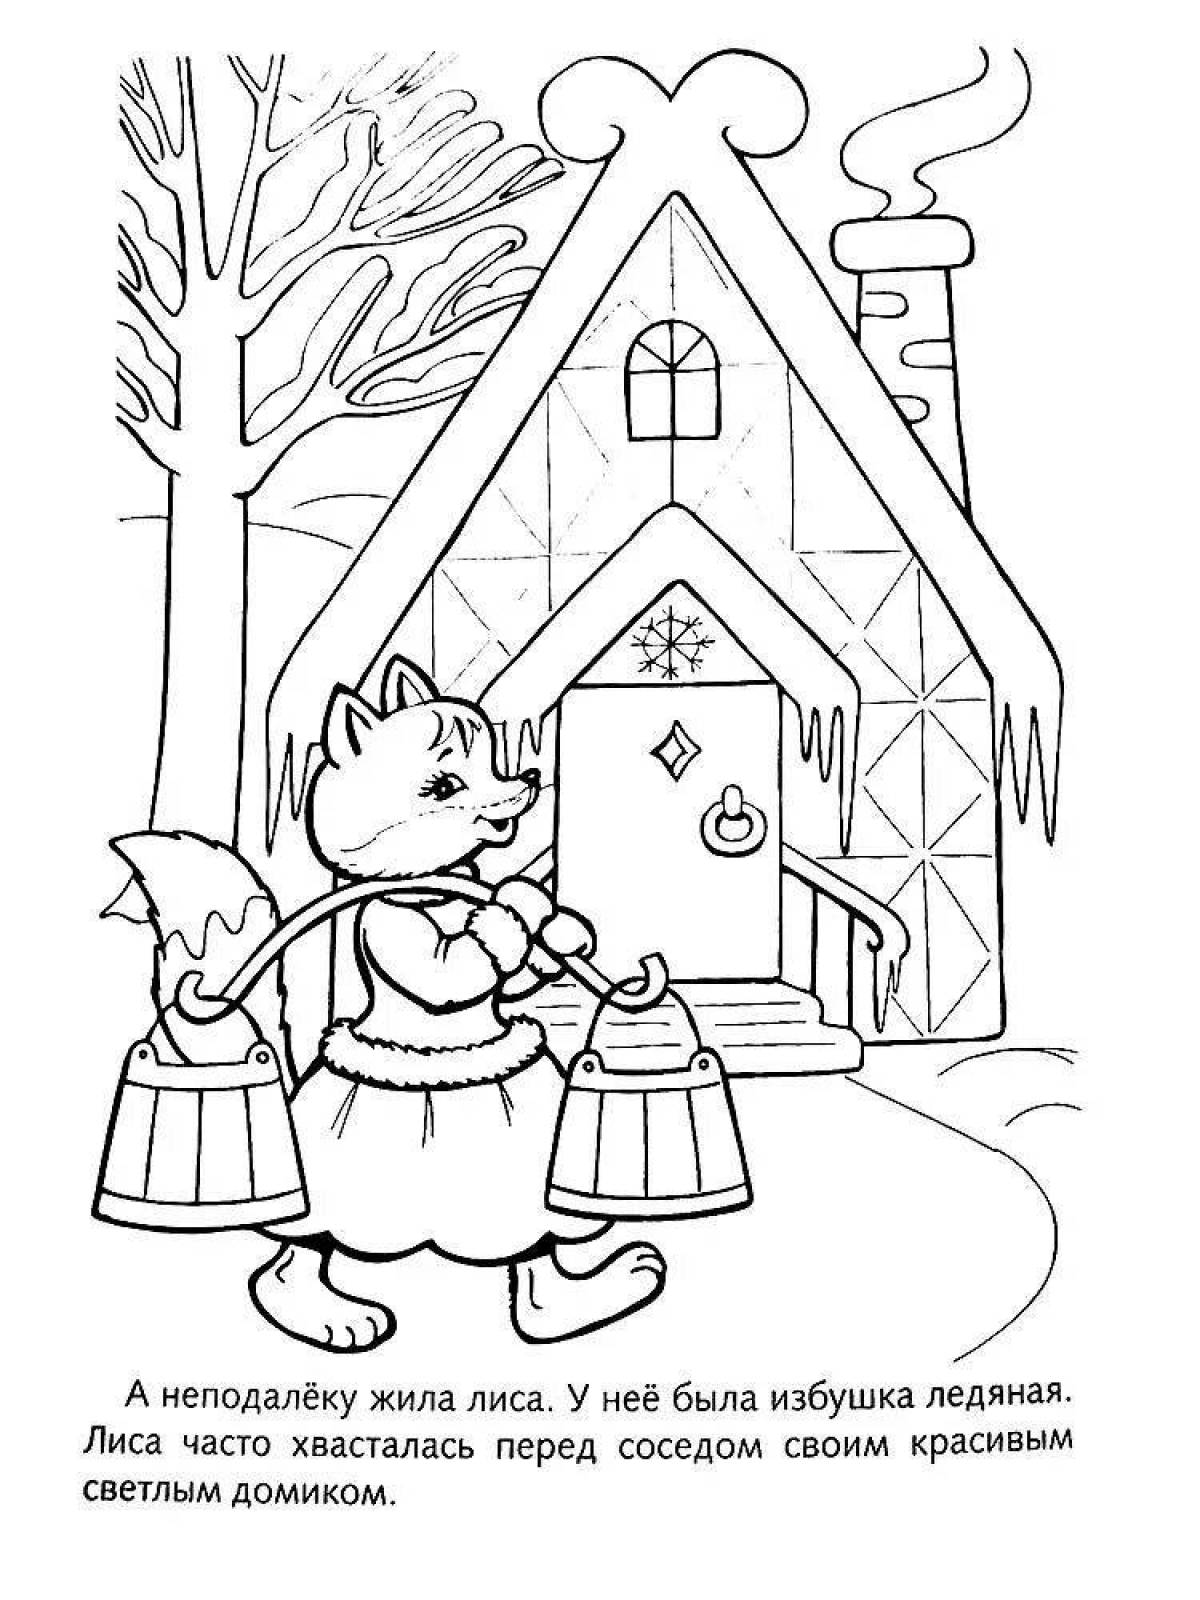 Rampant Bast and Ice Hut coloring page